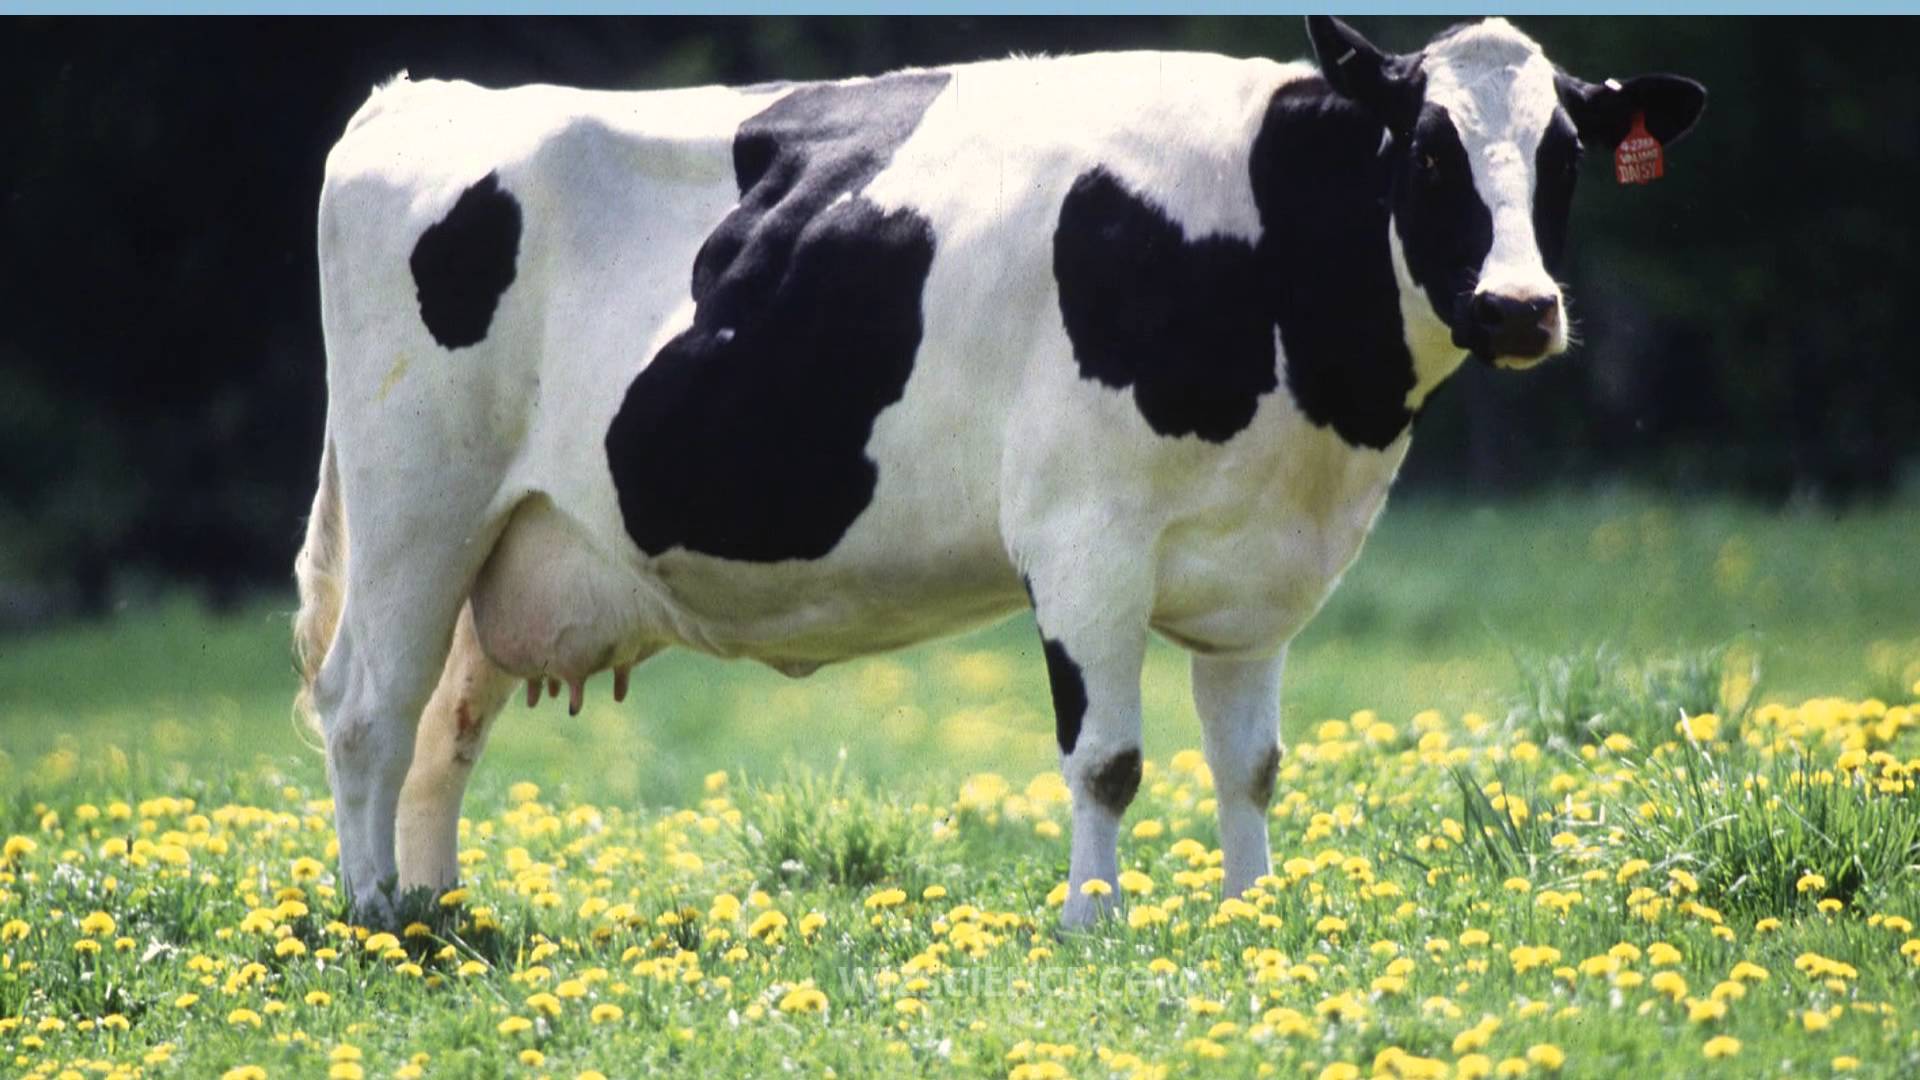 Holstein Friesian cattle - Video Learning - WizScience.com - YouTube